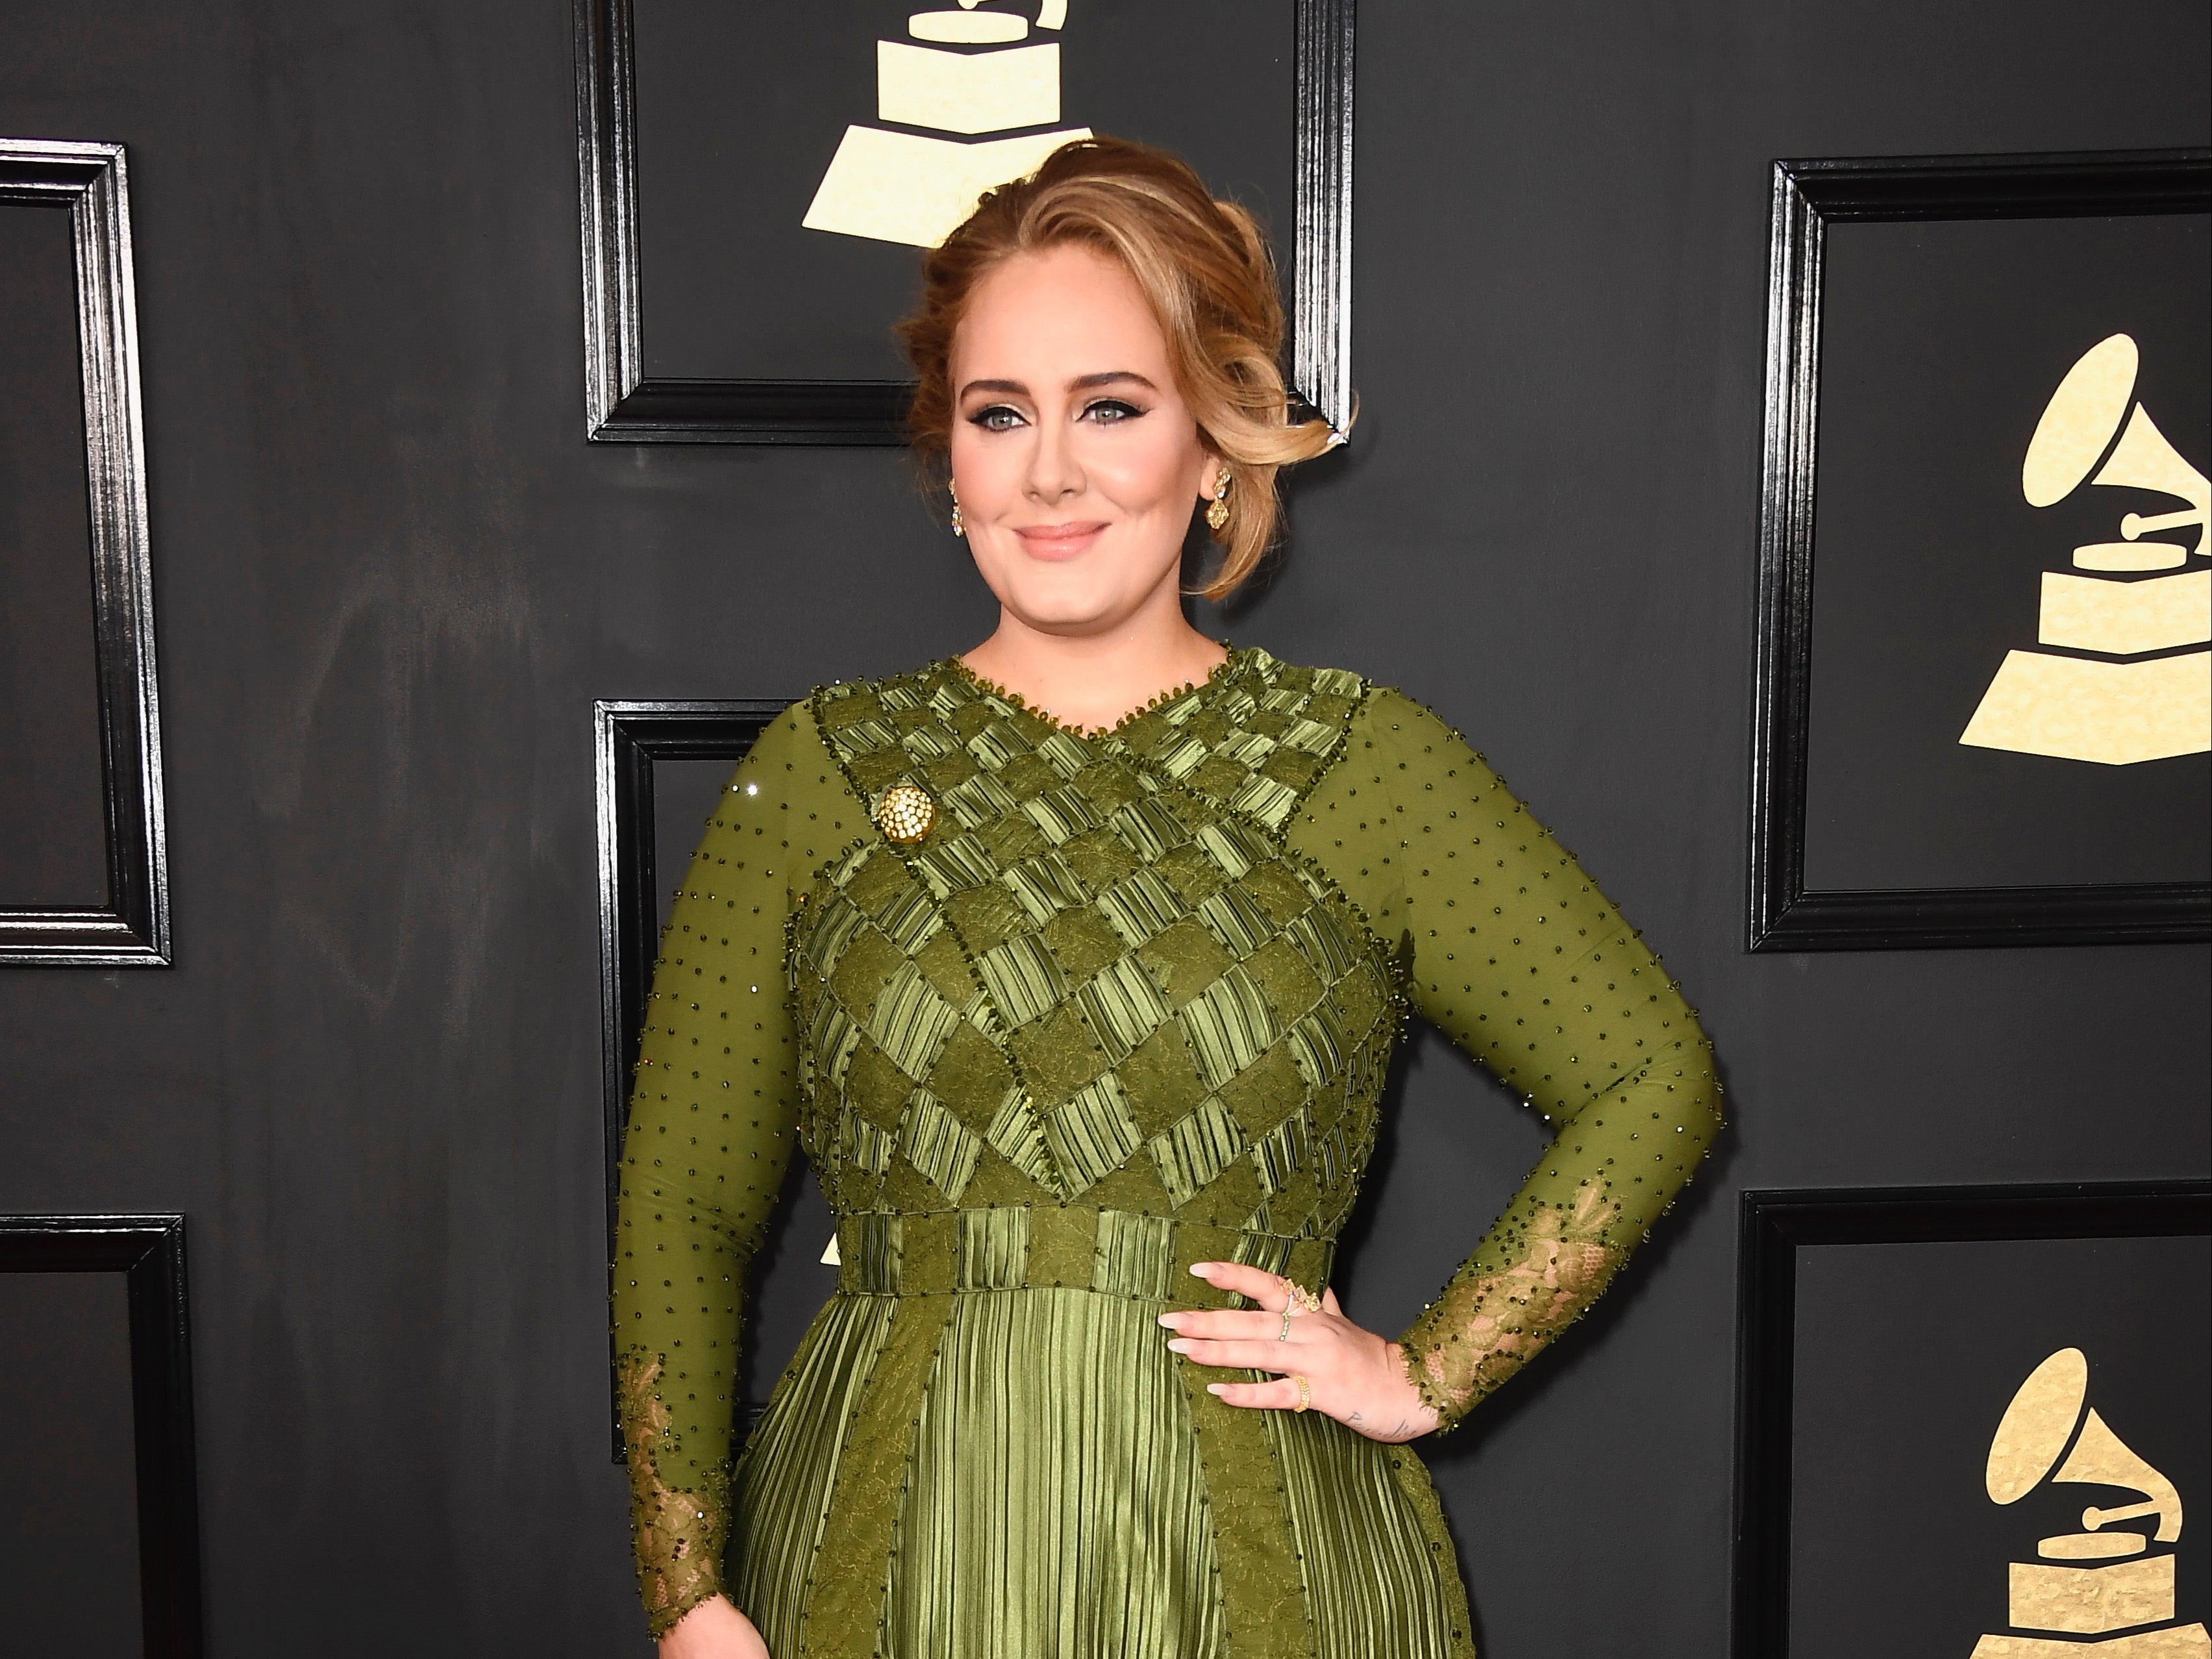 Adele opens up about feelings after divorce from Simon Konecki